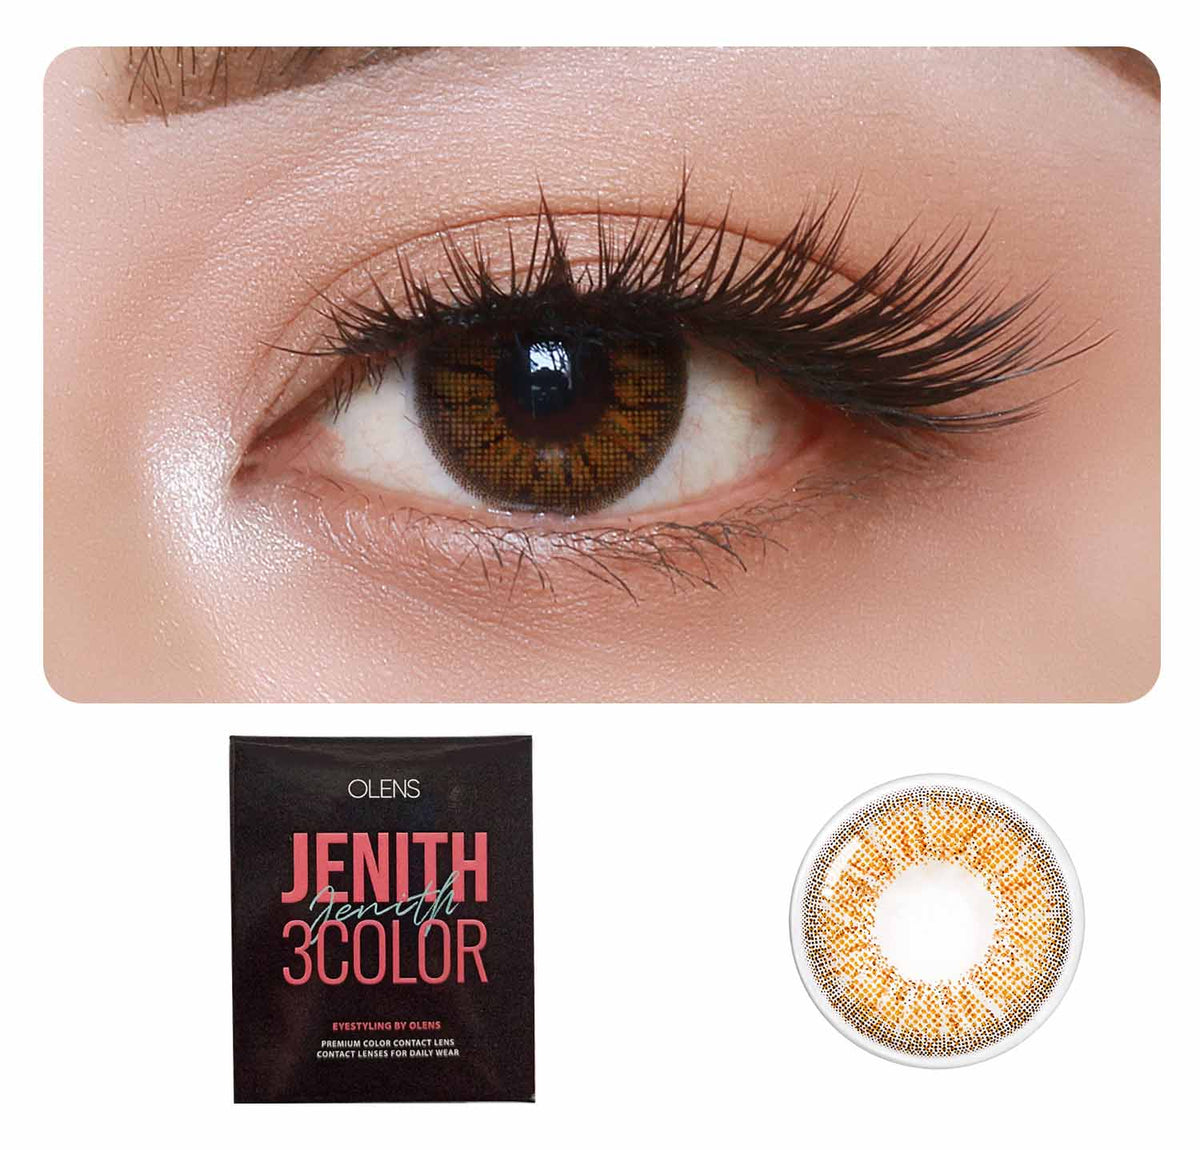  OLENS Premium Color Contact Lens | | Jenith3 Brown | Best lenses in India for longer duration | o-lens.co.in.